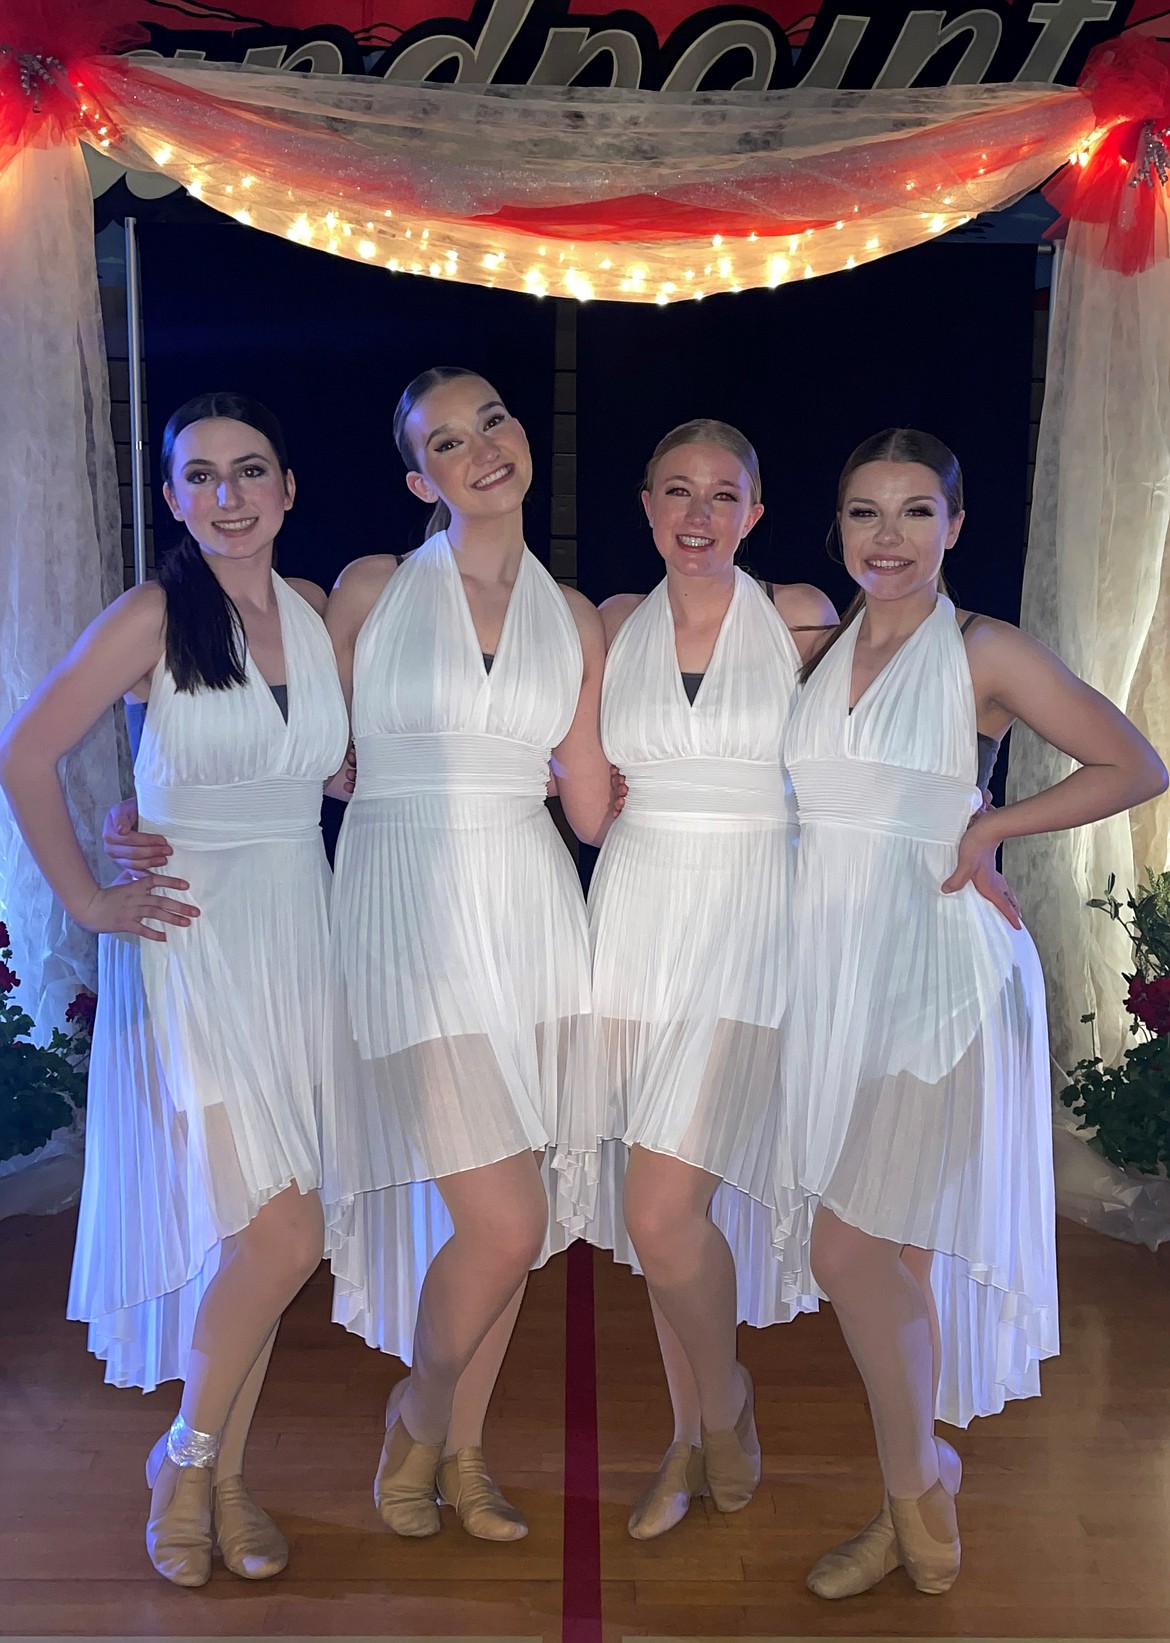 Senior members of the SHS dance team at their final performance on Saturday. From left to right: Mikah Little, Madison Coon, Riley Adam, Haleigh Knowles.